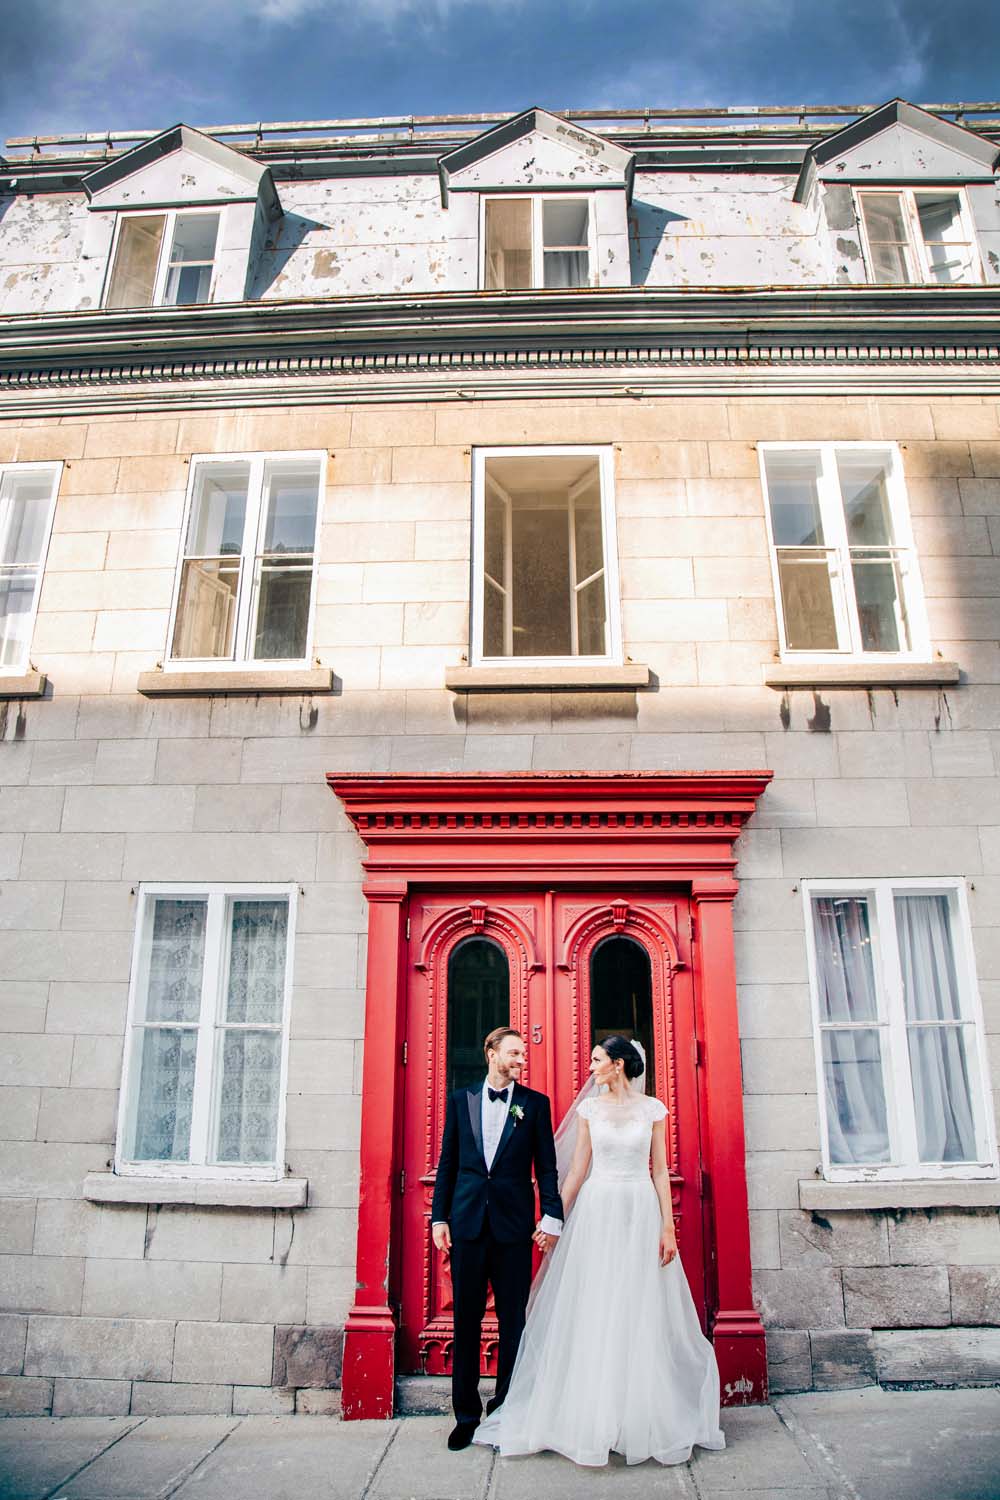 An Elegant White and Gold Wedding in Quebec City - Bride and Groom